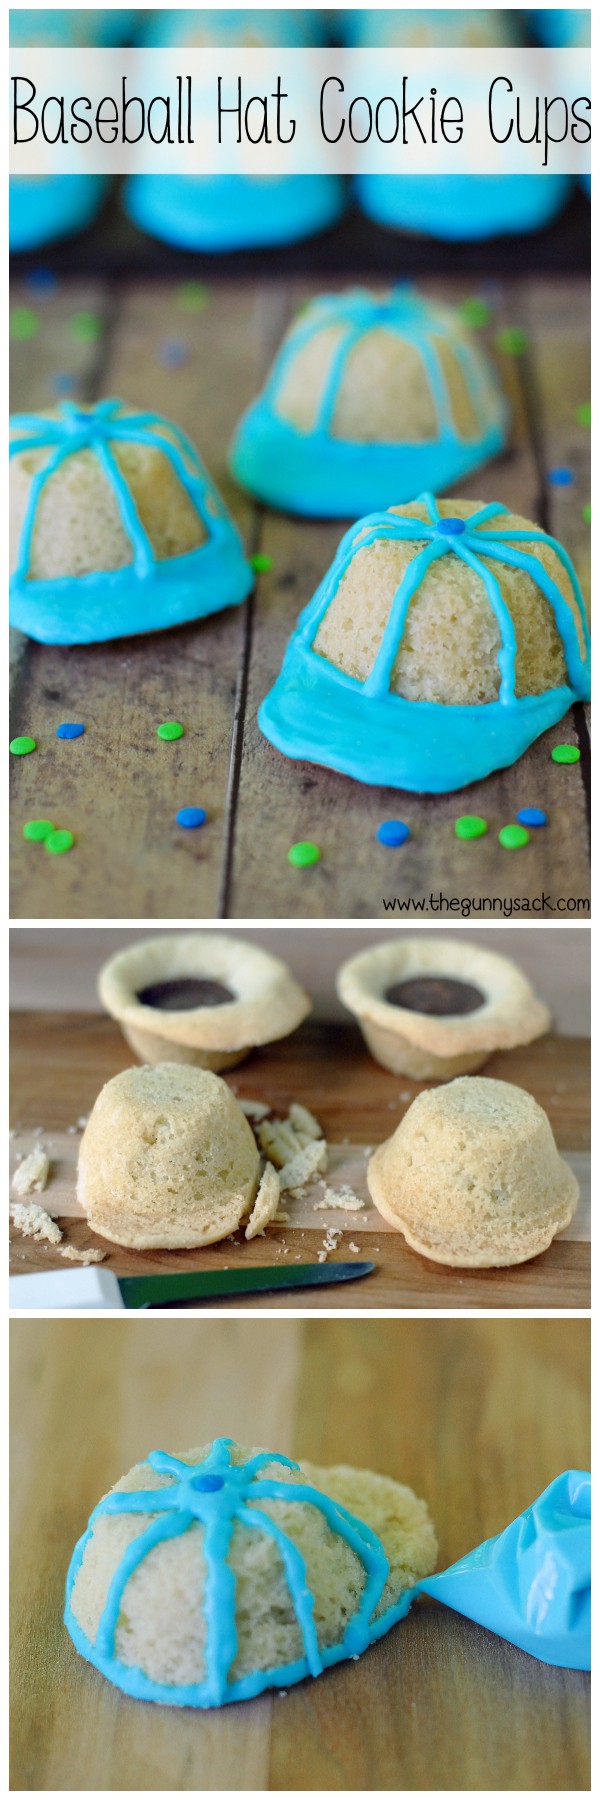 Baseball Hat Cookie Cups